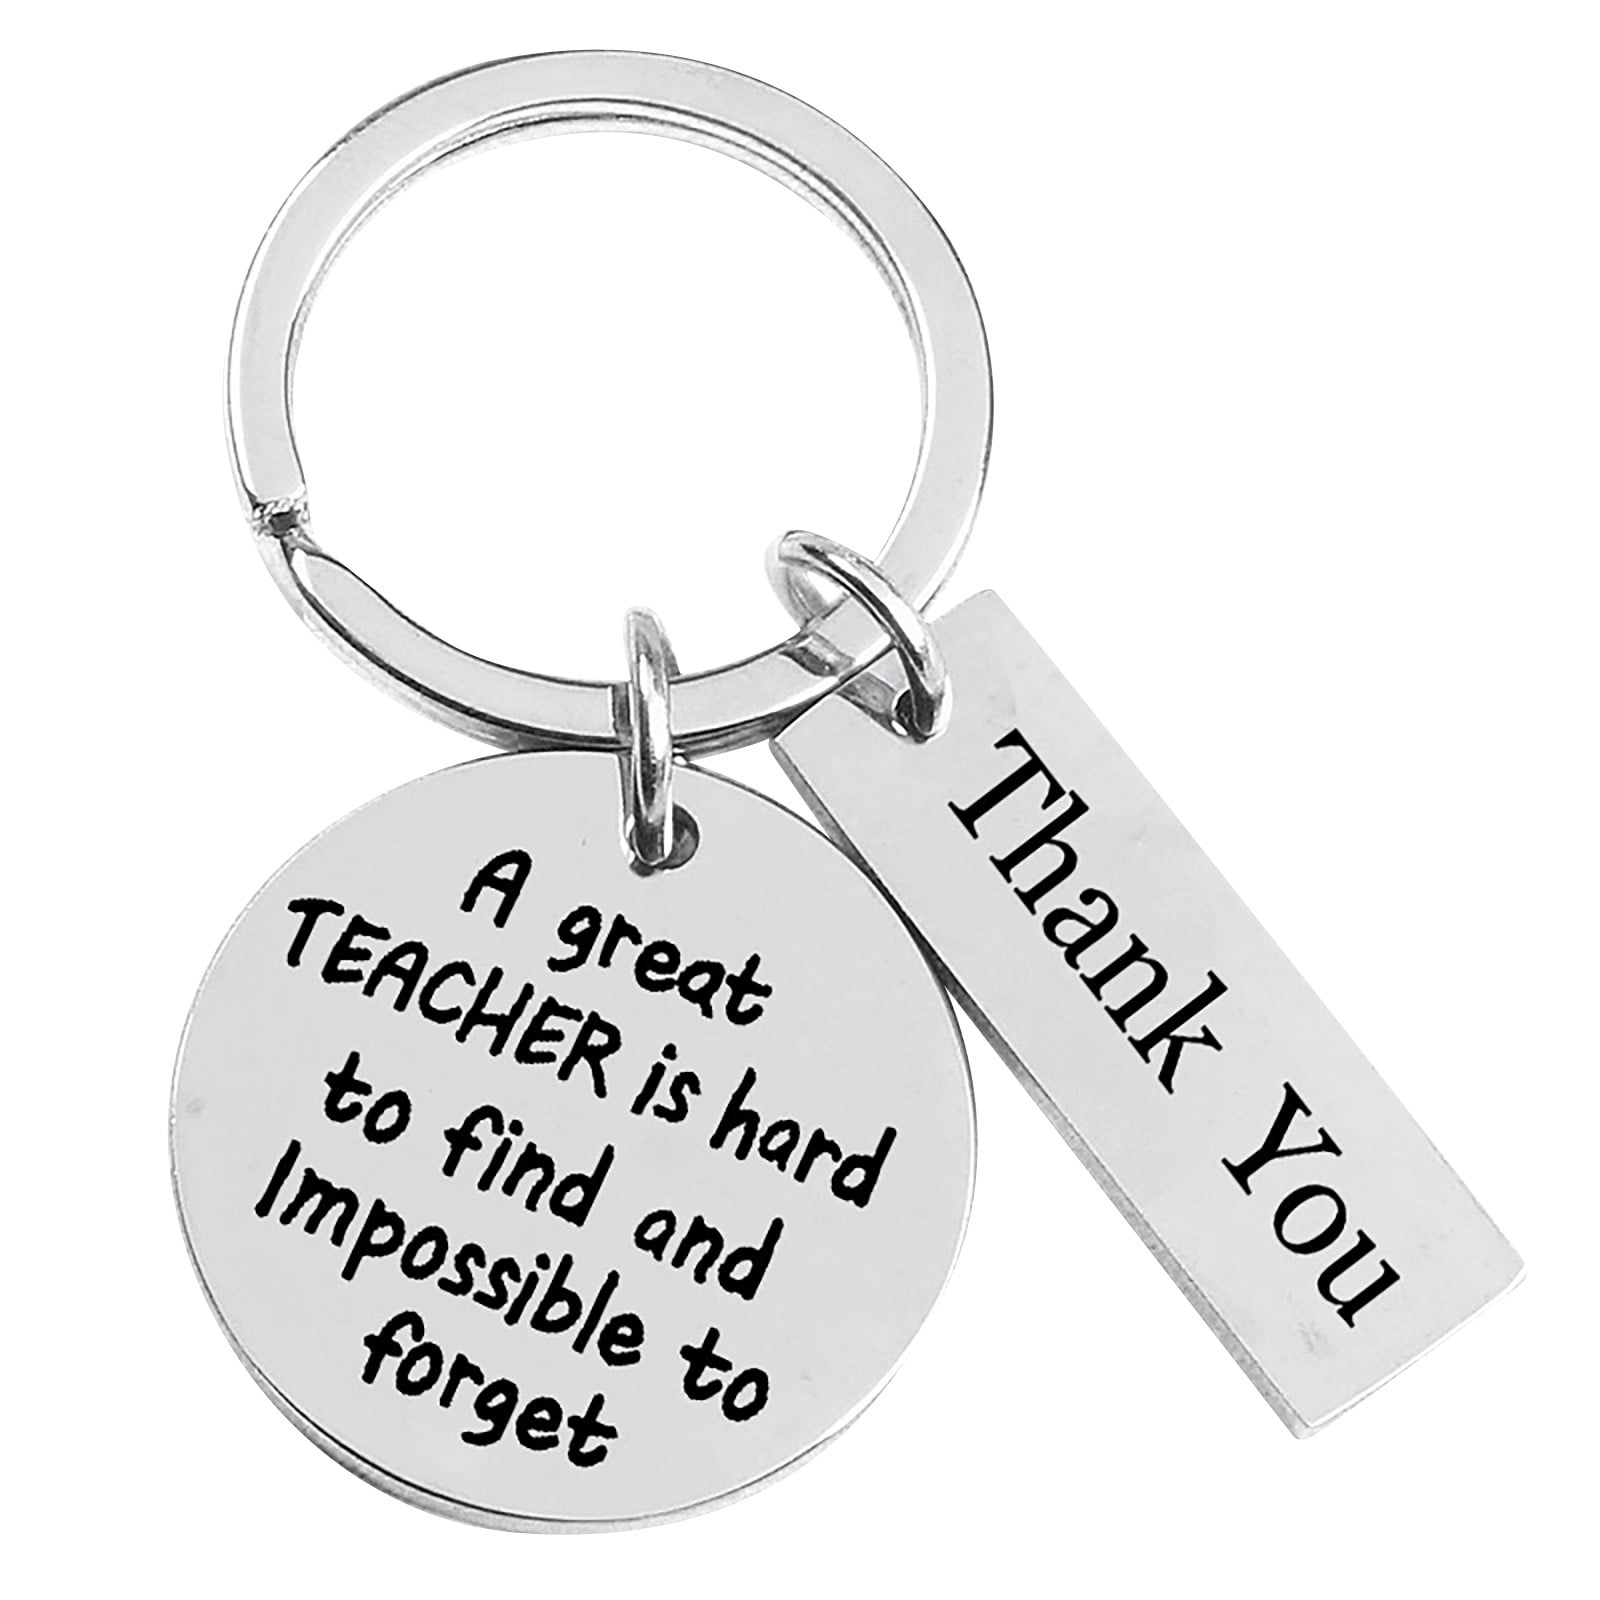 Special Needs Assistant Teacher SEN Thank you Gift Key Ring Bag Charm on Card 